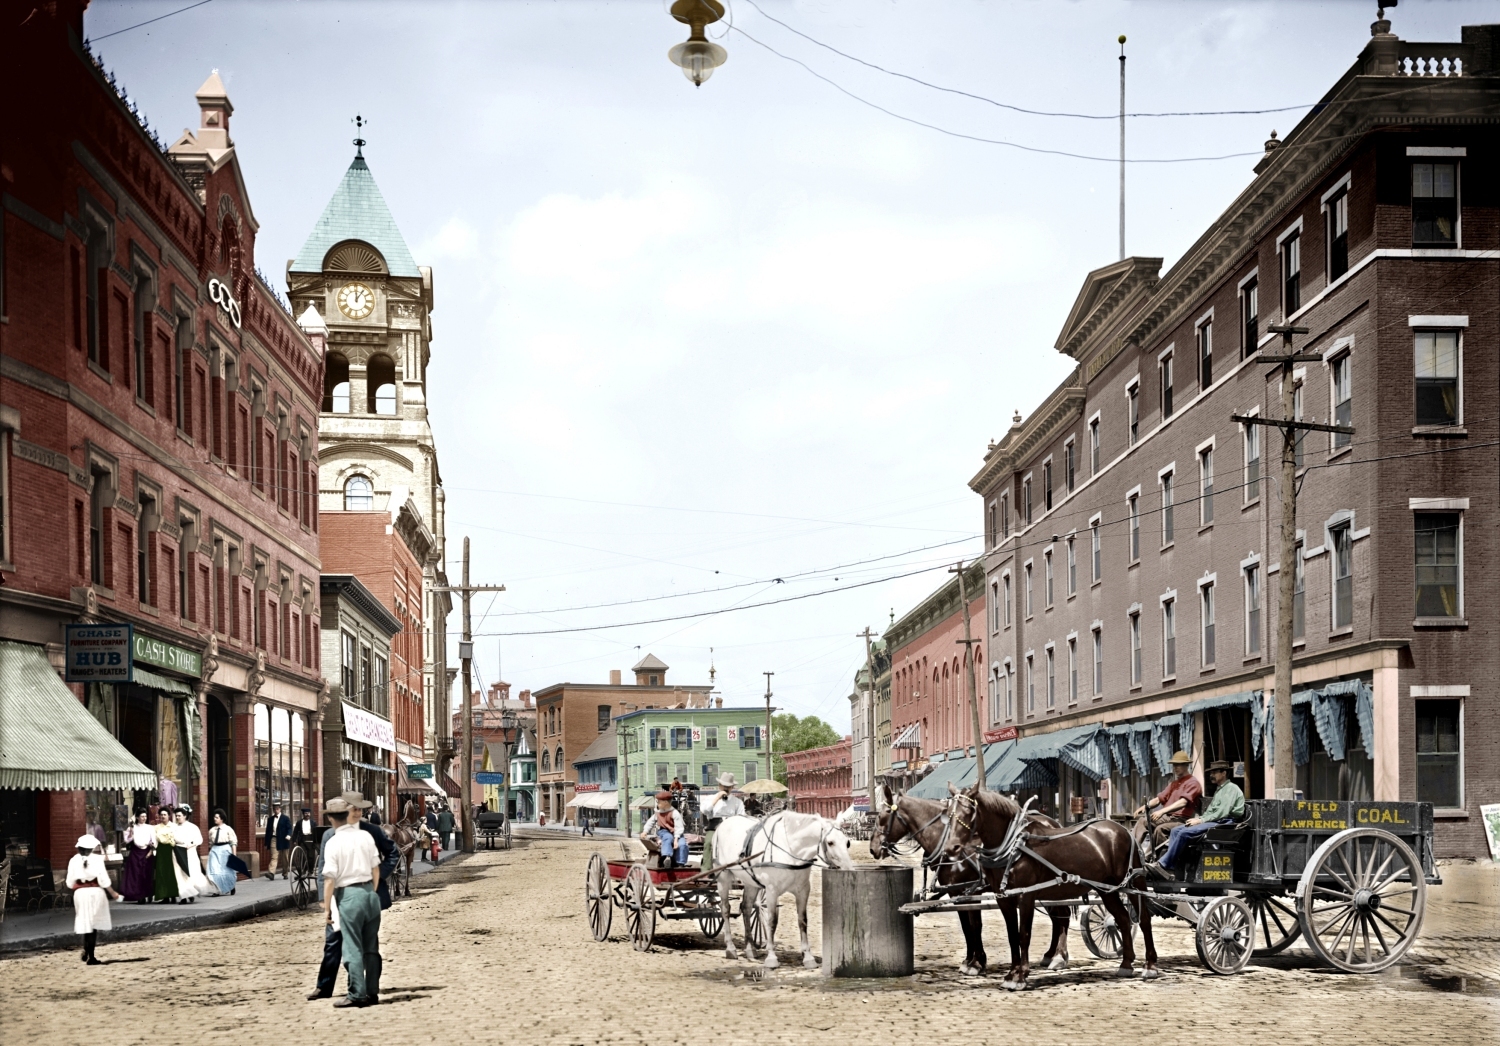 Bellows Falls, Vermont, circa 1907. "The Square." (Colorized). 8x10 inch dry plate glass negative, Detroit Publishing Company. View full size.